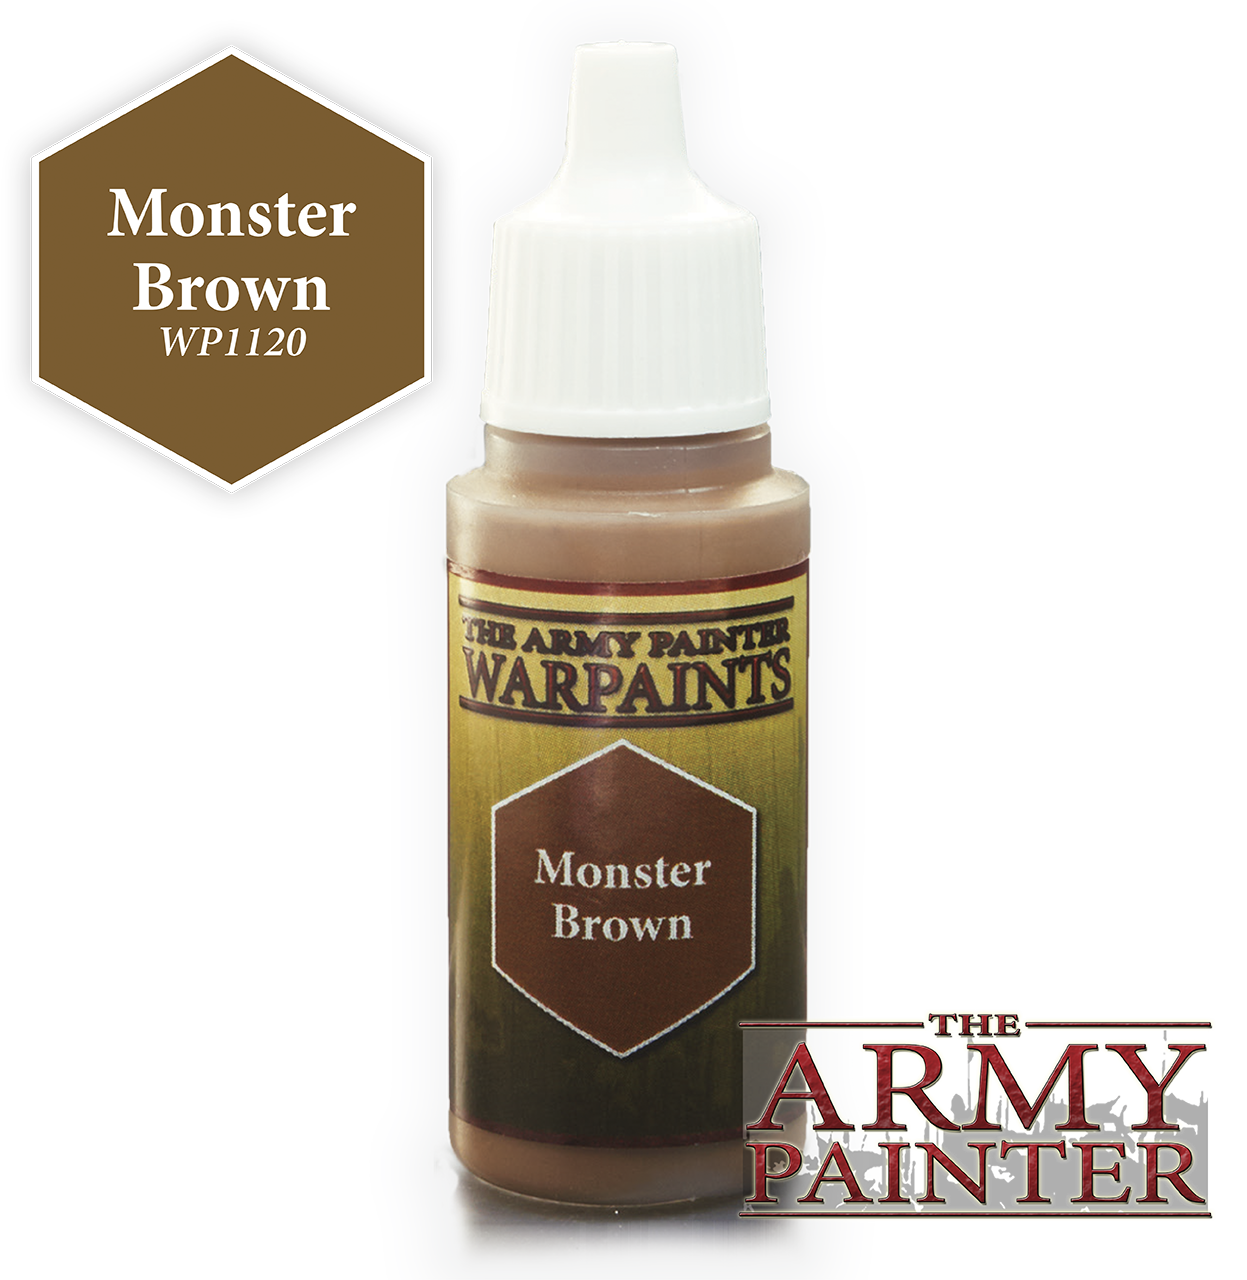 The ARMY PAINTER: Acrylics Warpaint - Monster Brown | Tacoma Games